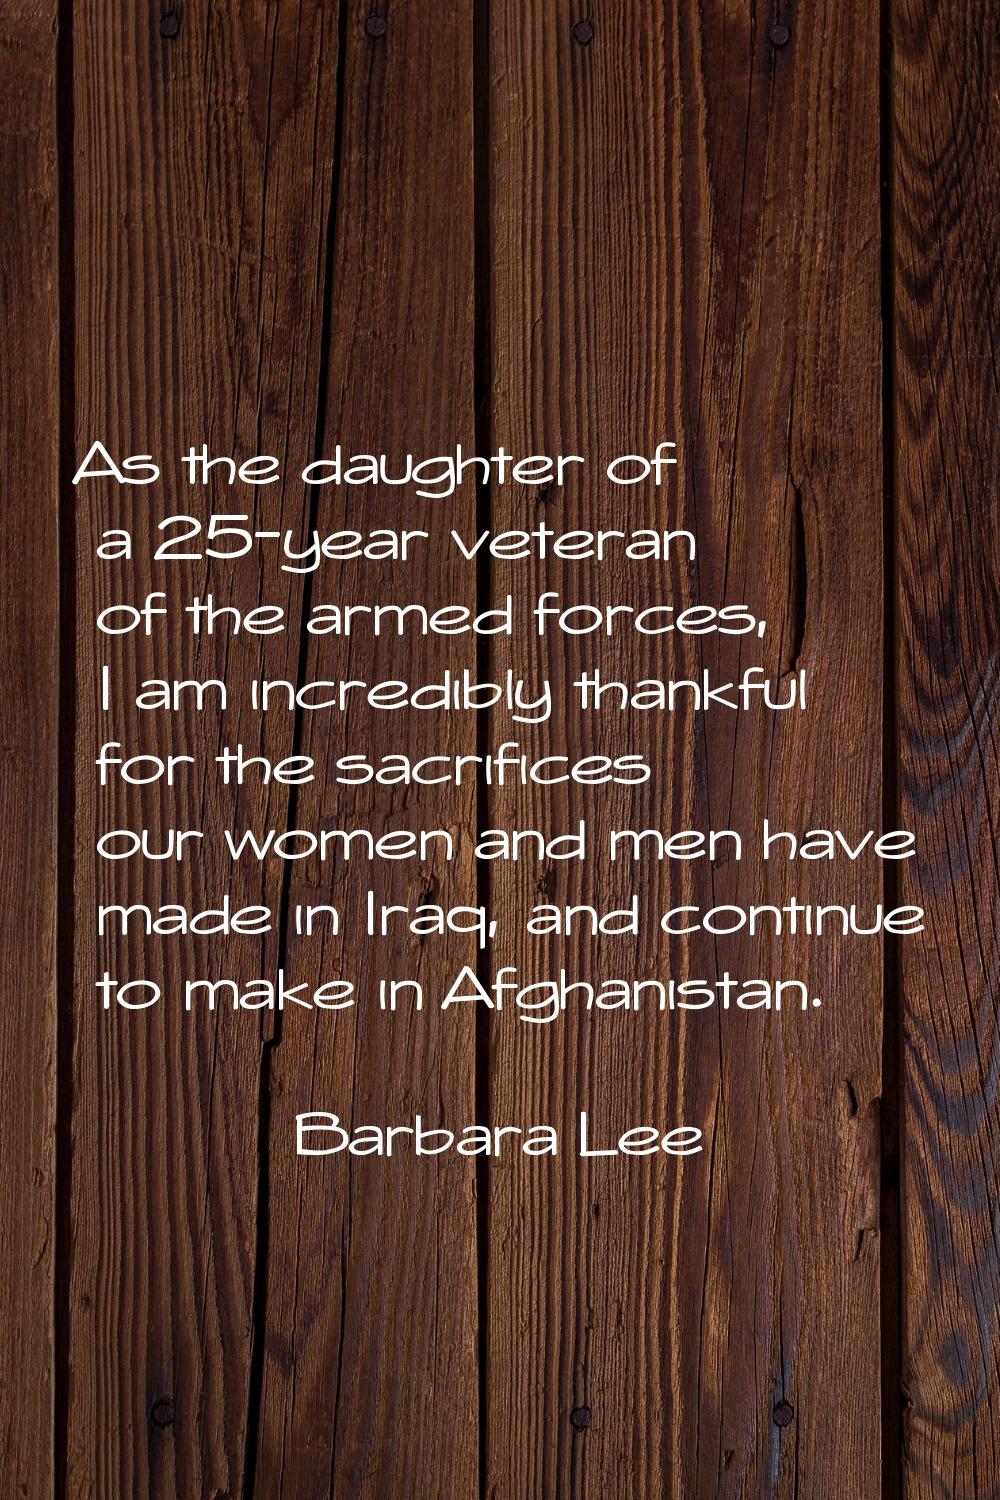 As the daughter of a 25-year veteran of the armed forces, I am incredibly thankful for the sacrific